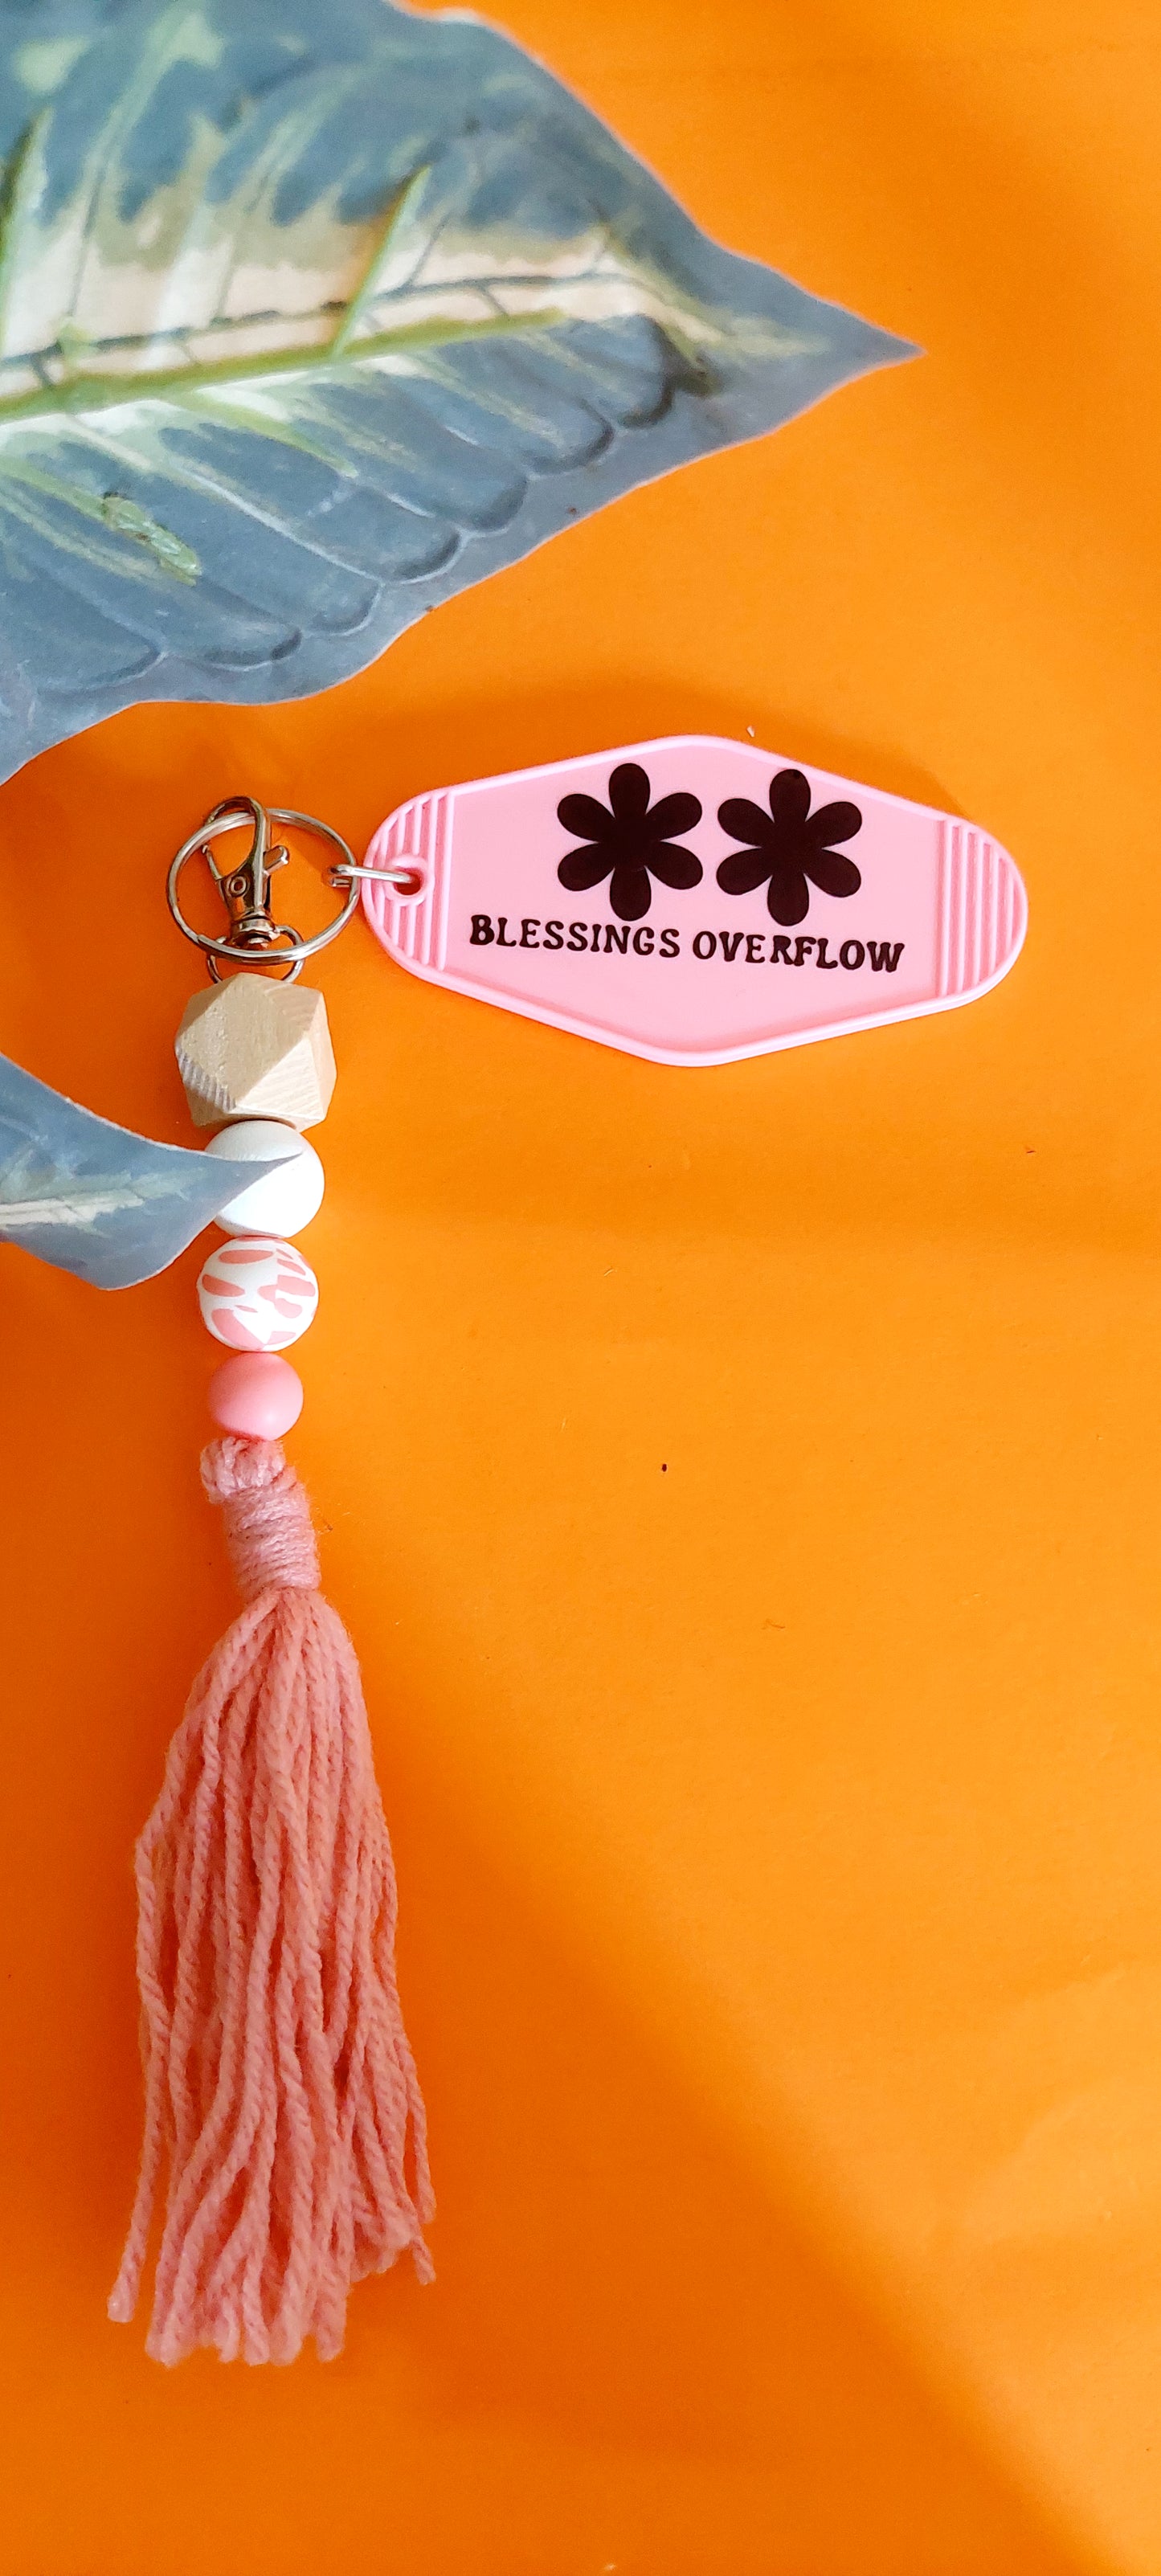 Blessings Overflow Keychain